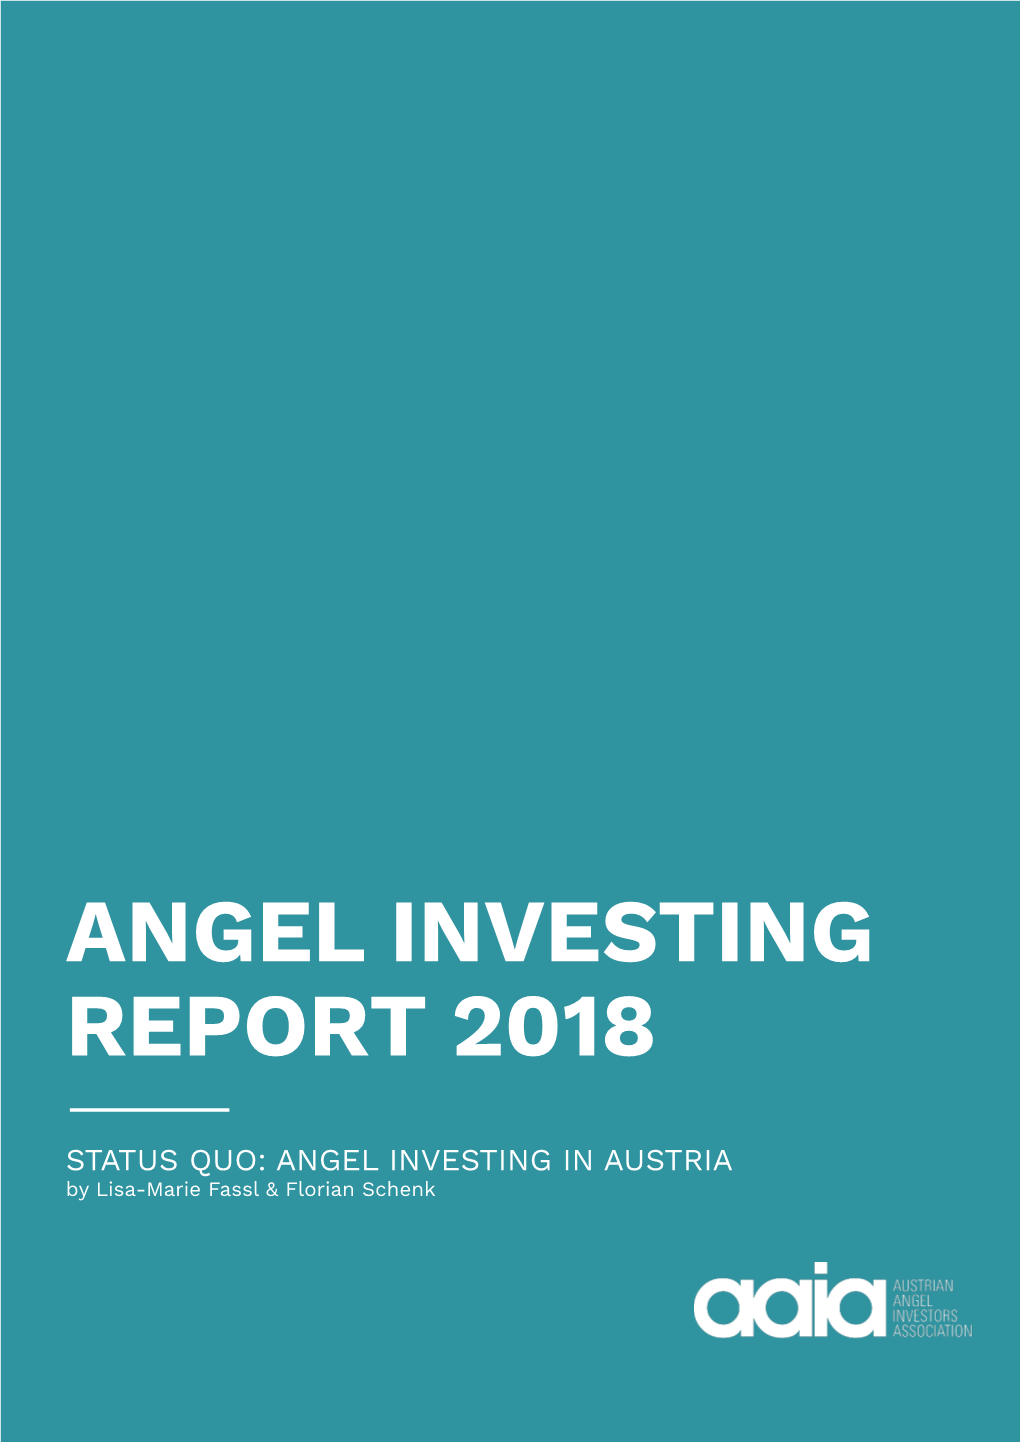 Aaia Angel Investing Report 2018